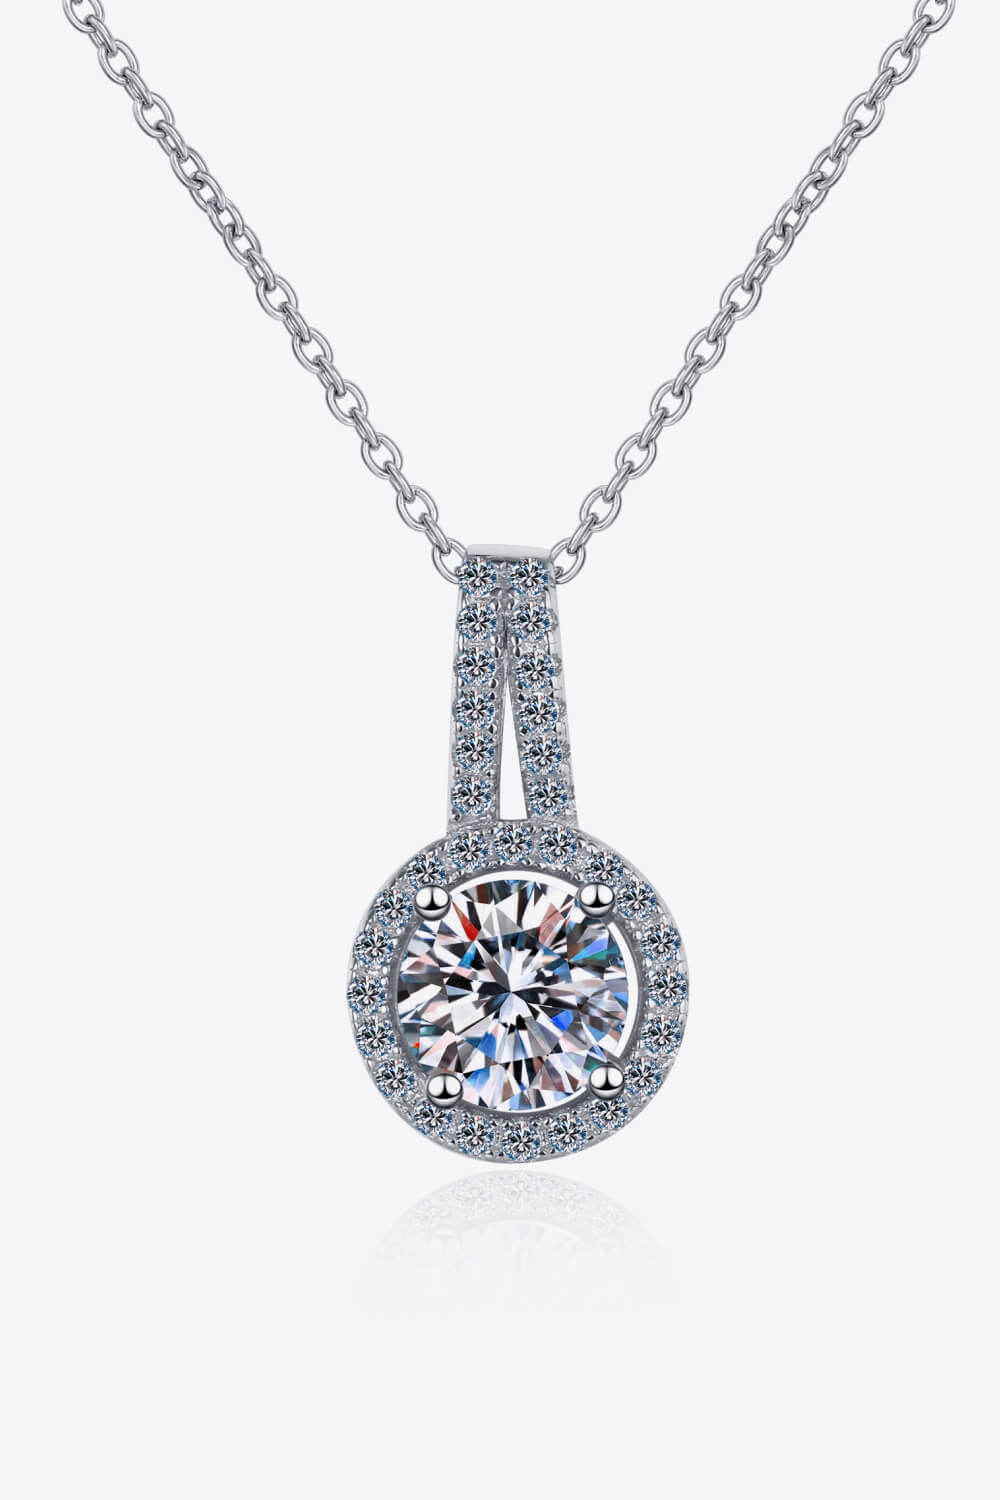 Build You Up Moissanite Round Pendant Chain Necklace BLUE ZONE PLANET